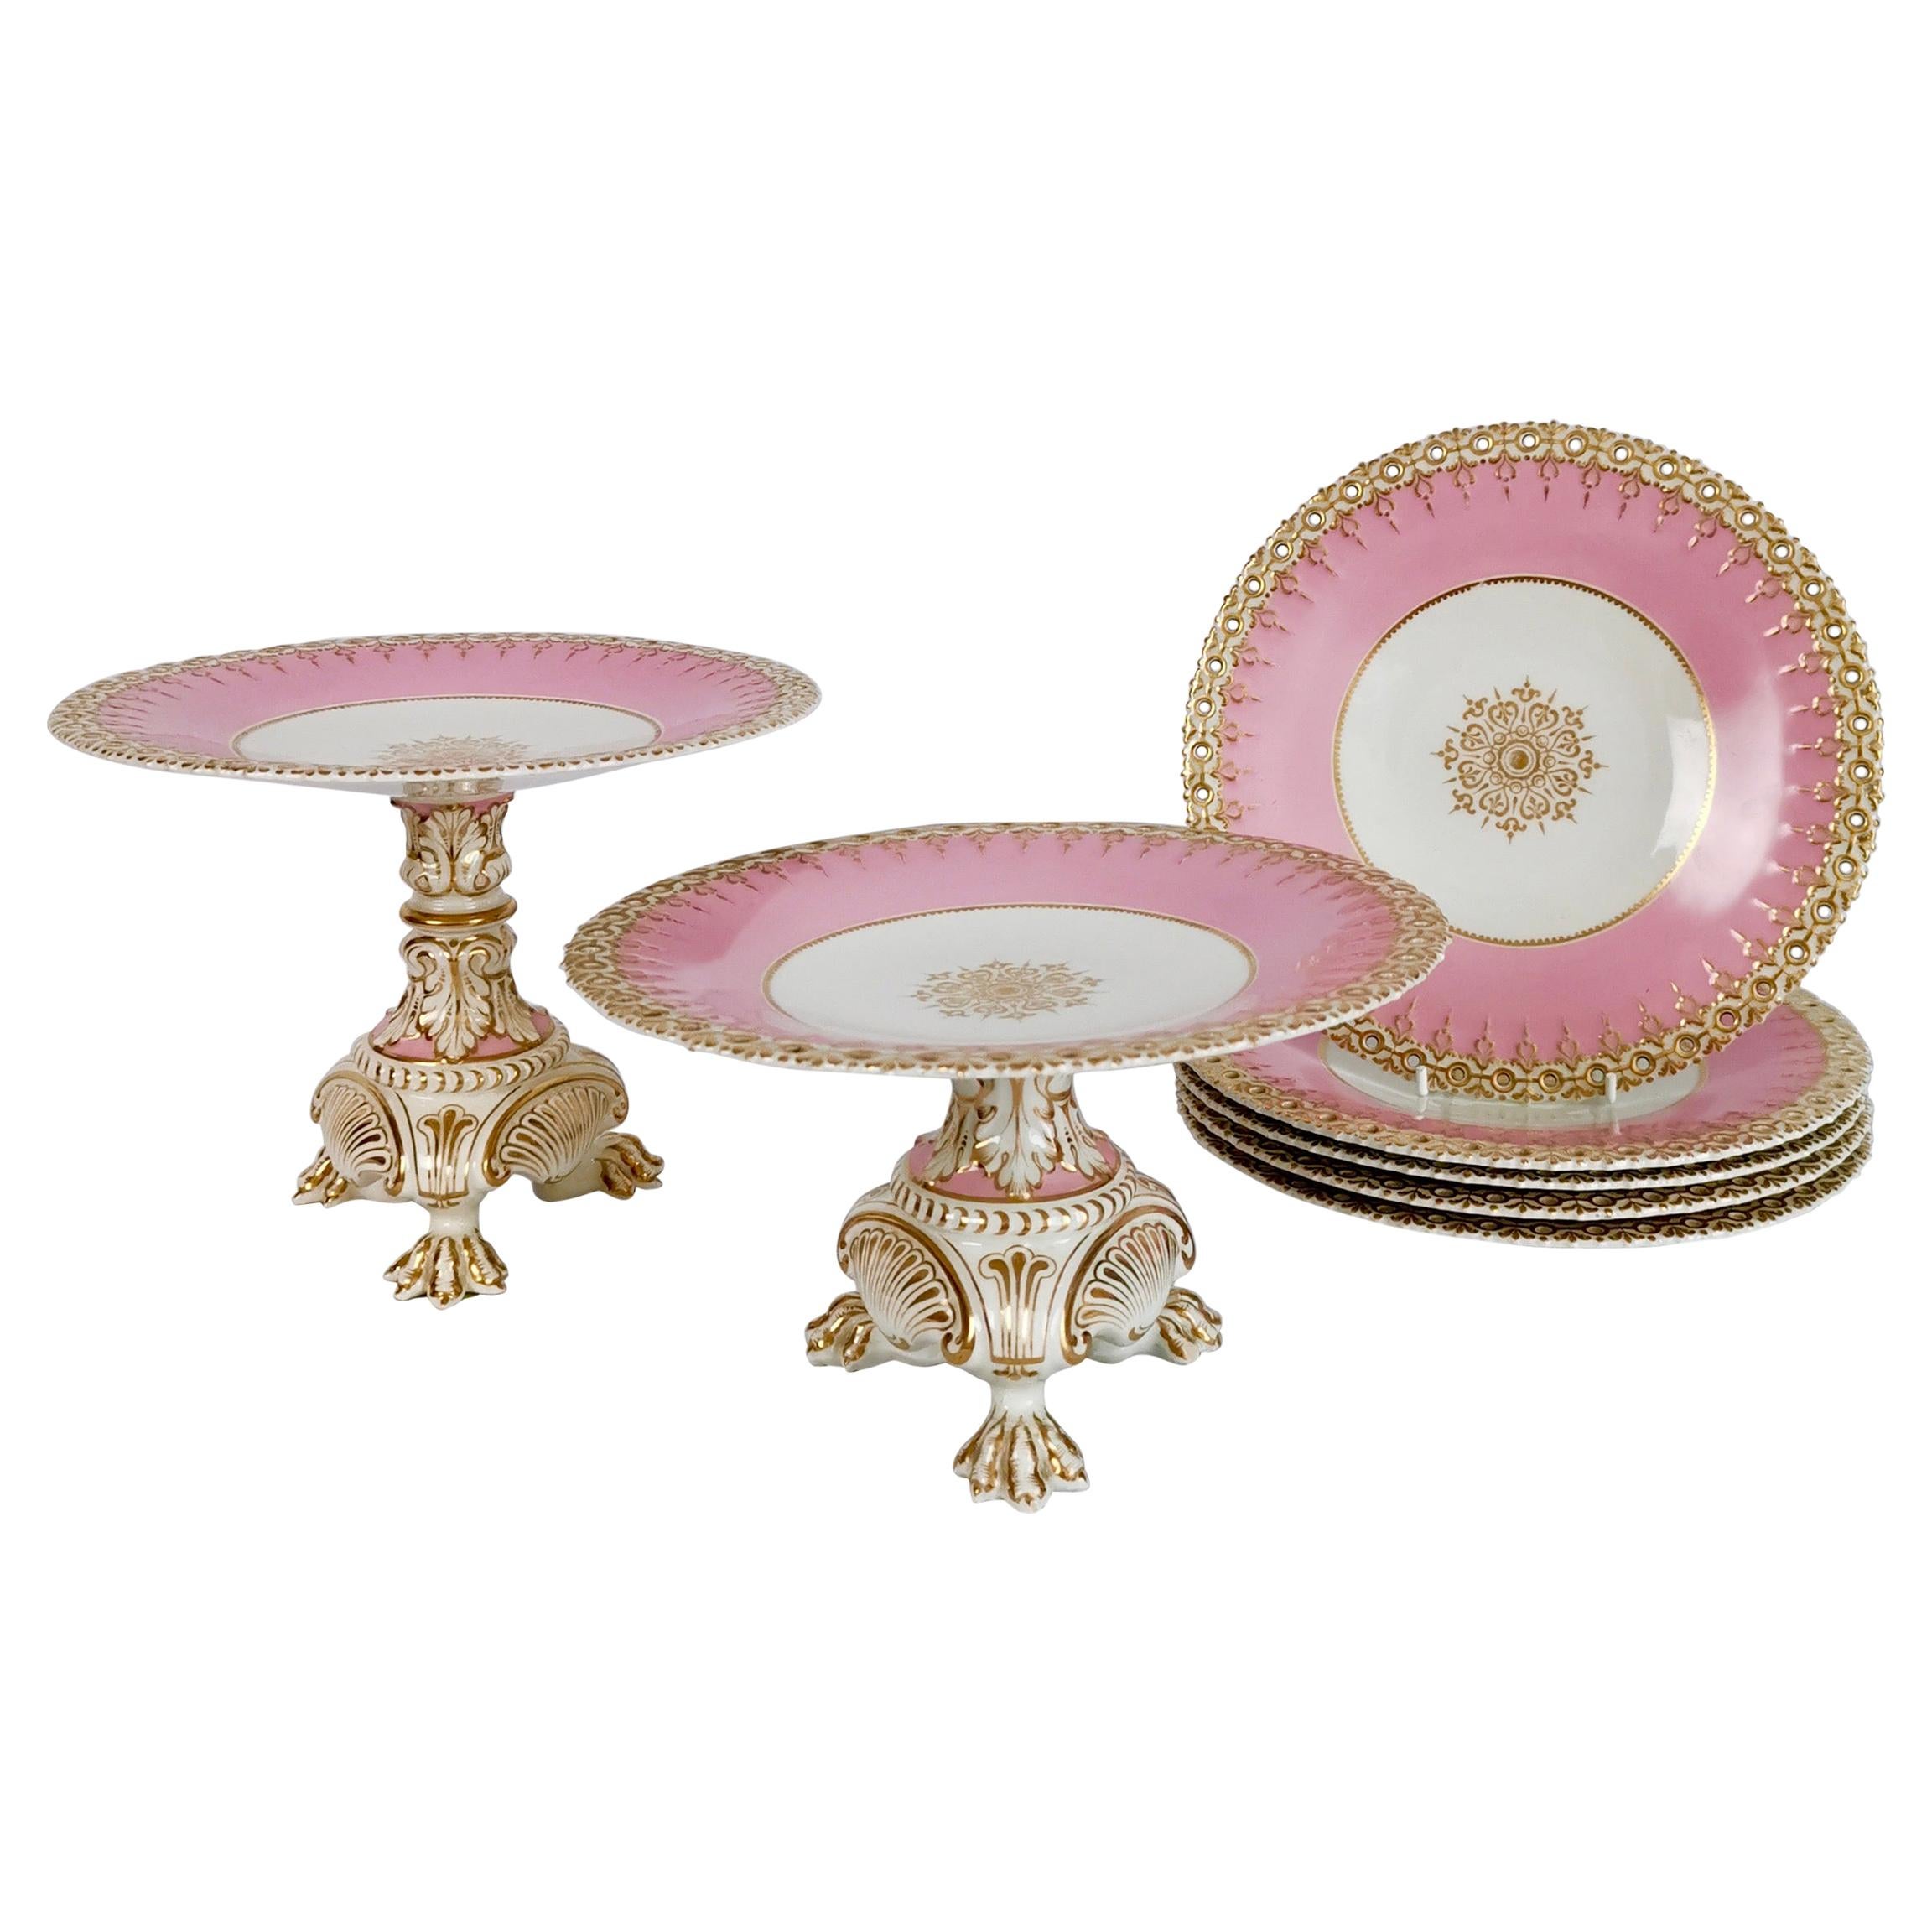 Pink Porcelain Dessert Service, Spectacular Claw-Footed Tazzas, Victorian